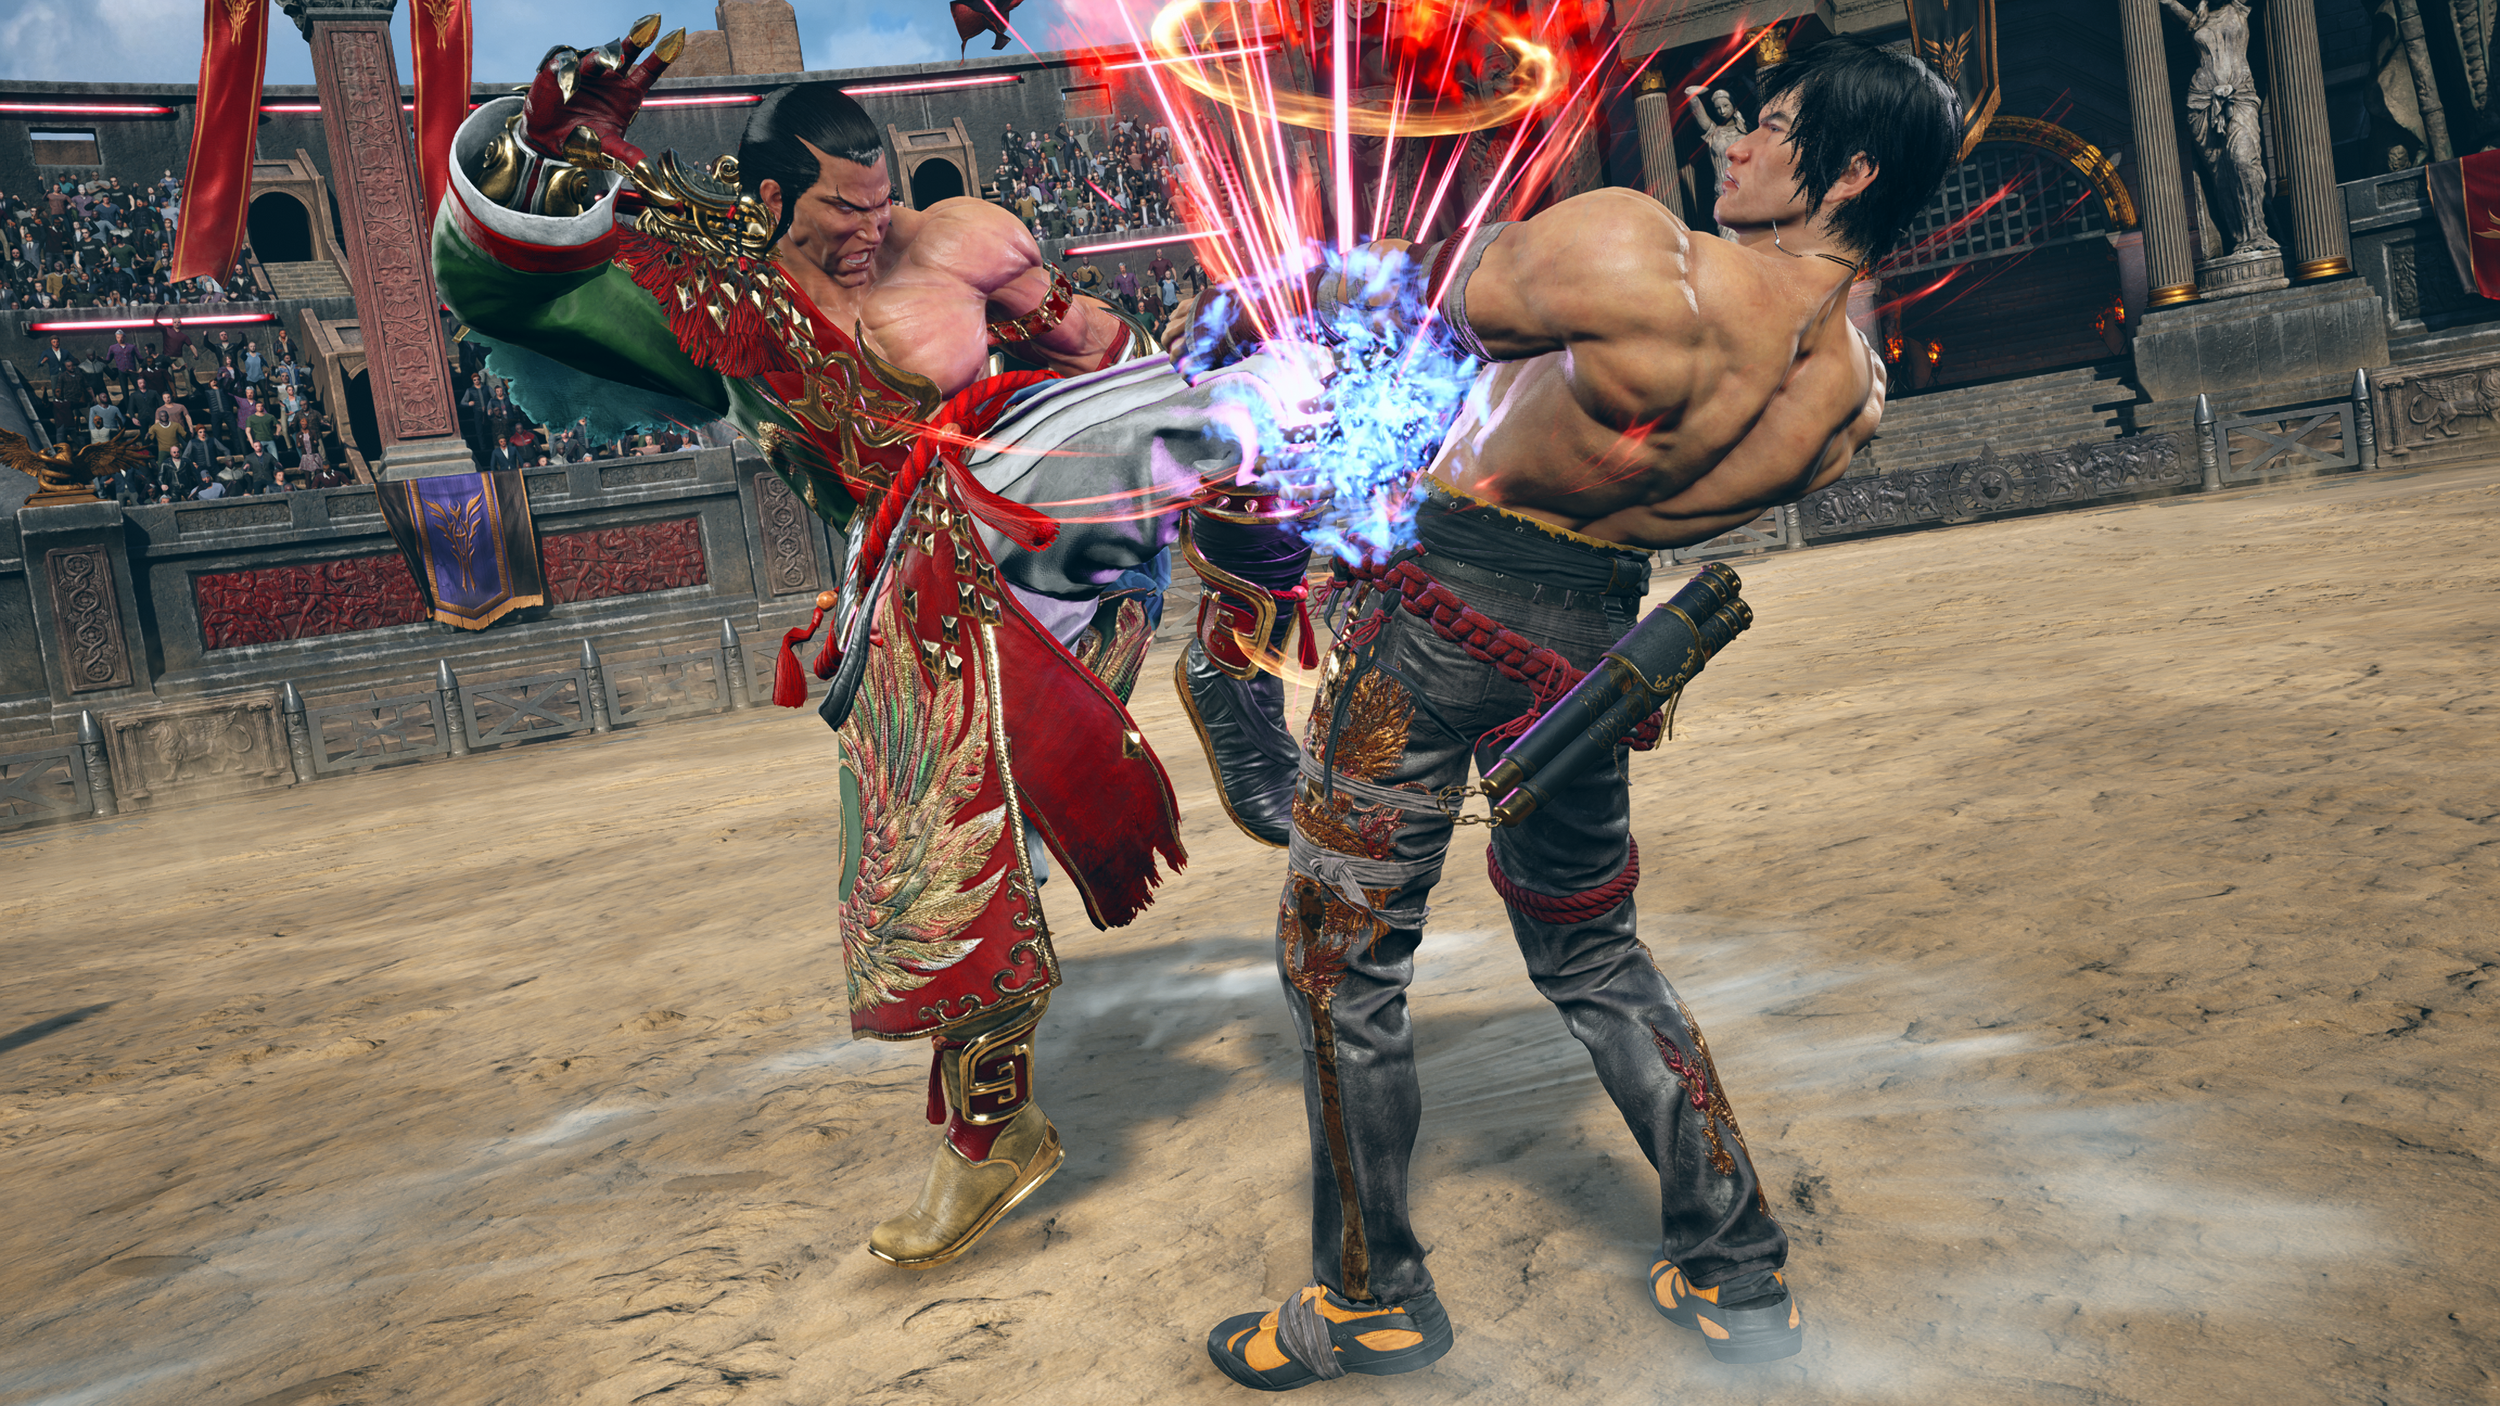 Why those 5 from Gamescom wont stick in the Tekken 8 Beta? I mean they were  announced a long ago already but Feng just dropped today and he's already  in? How tf